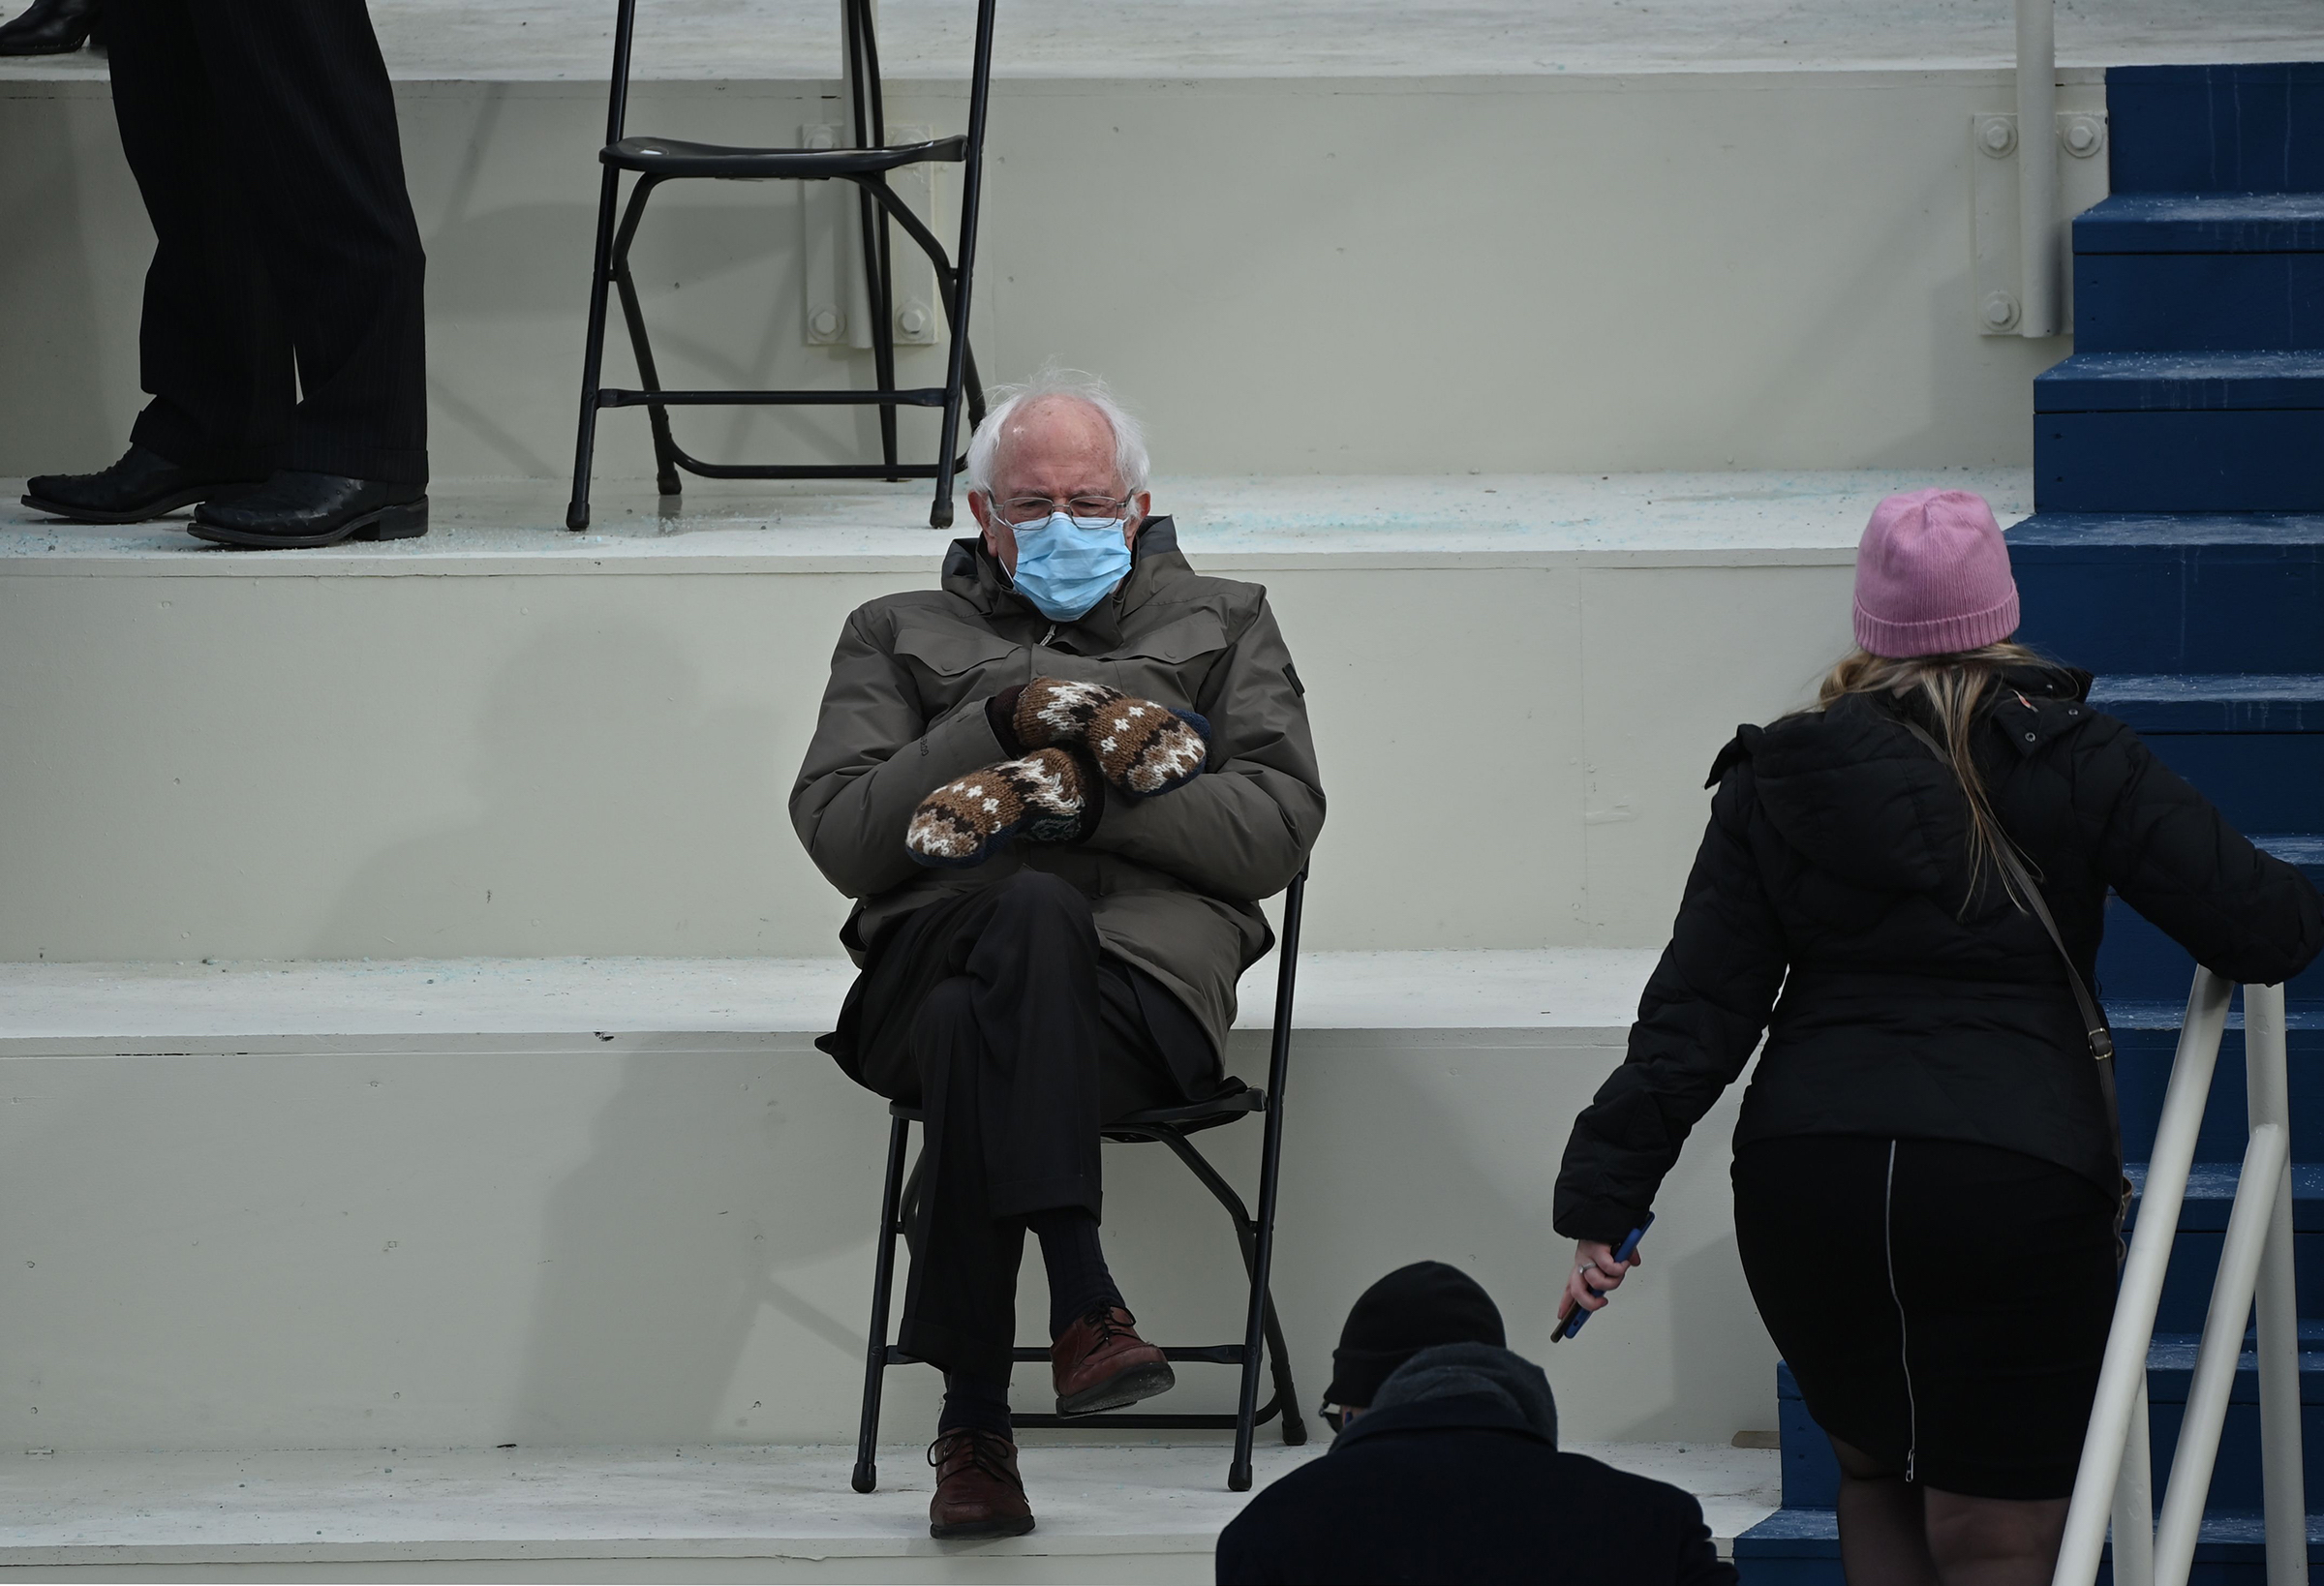 Sen. Bernie Sanders of Vermont sits crossed-legged on a socially distanced folding chair in the bleachers before Joe Biden is sworn in as the 46th U.S. President in Washington, D.C., on Jan. 20, 2021. The photograph became an instant meme. As one Twitter user, media professional Ashley K. Smalls, wrote: "This could've been an email."